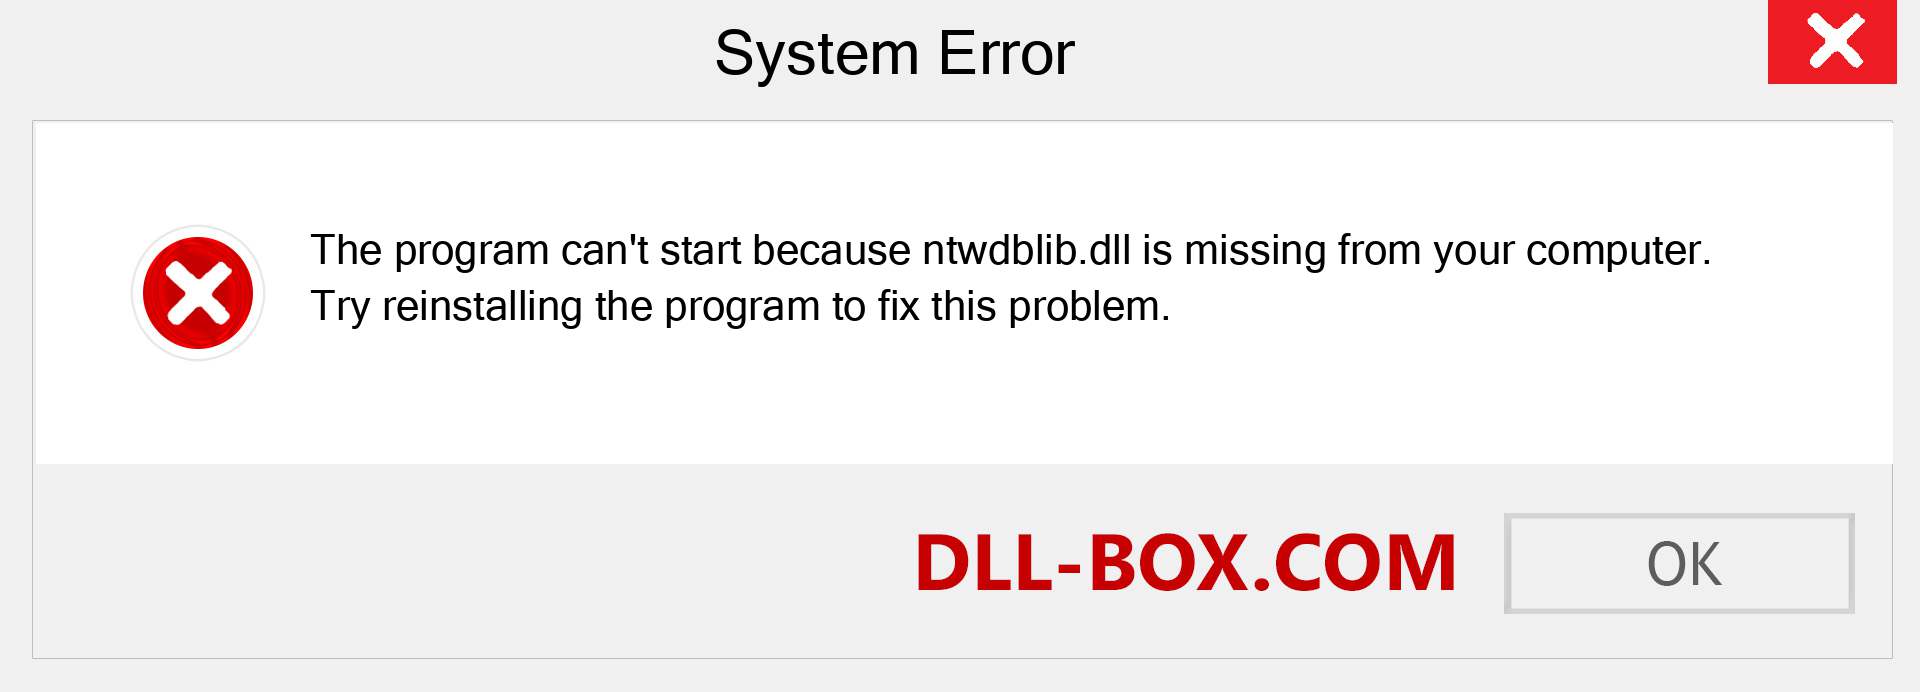  ntwdblib.dll file is missing?. Download for Windows 7, 8, 10 - Fix  ntwdblib dll Missing Error on Windows, photos, images